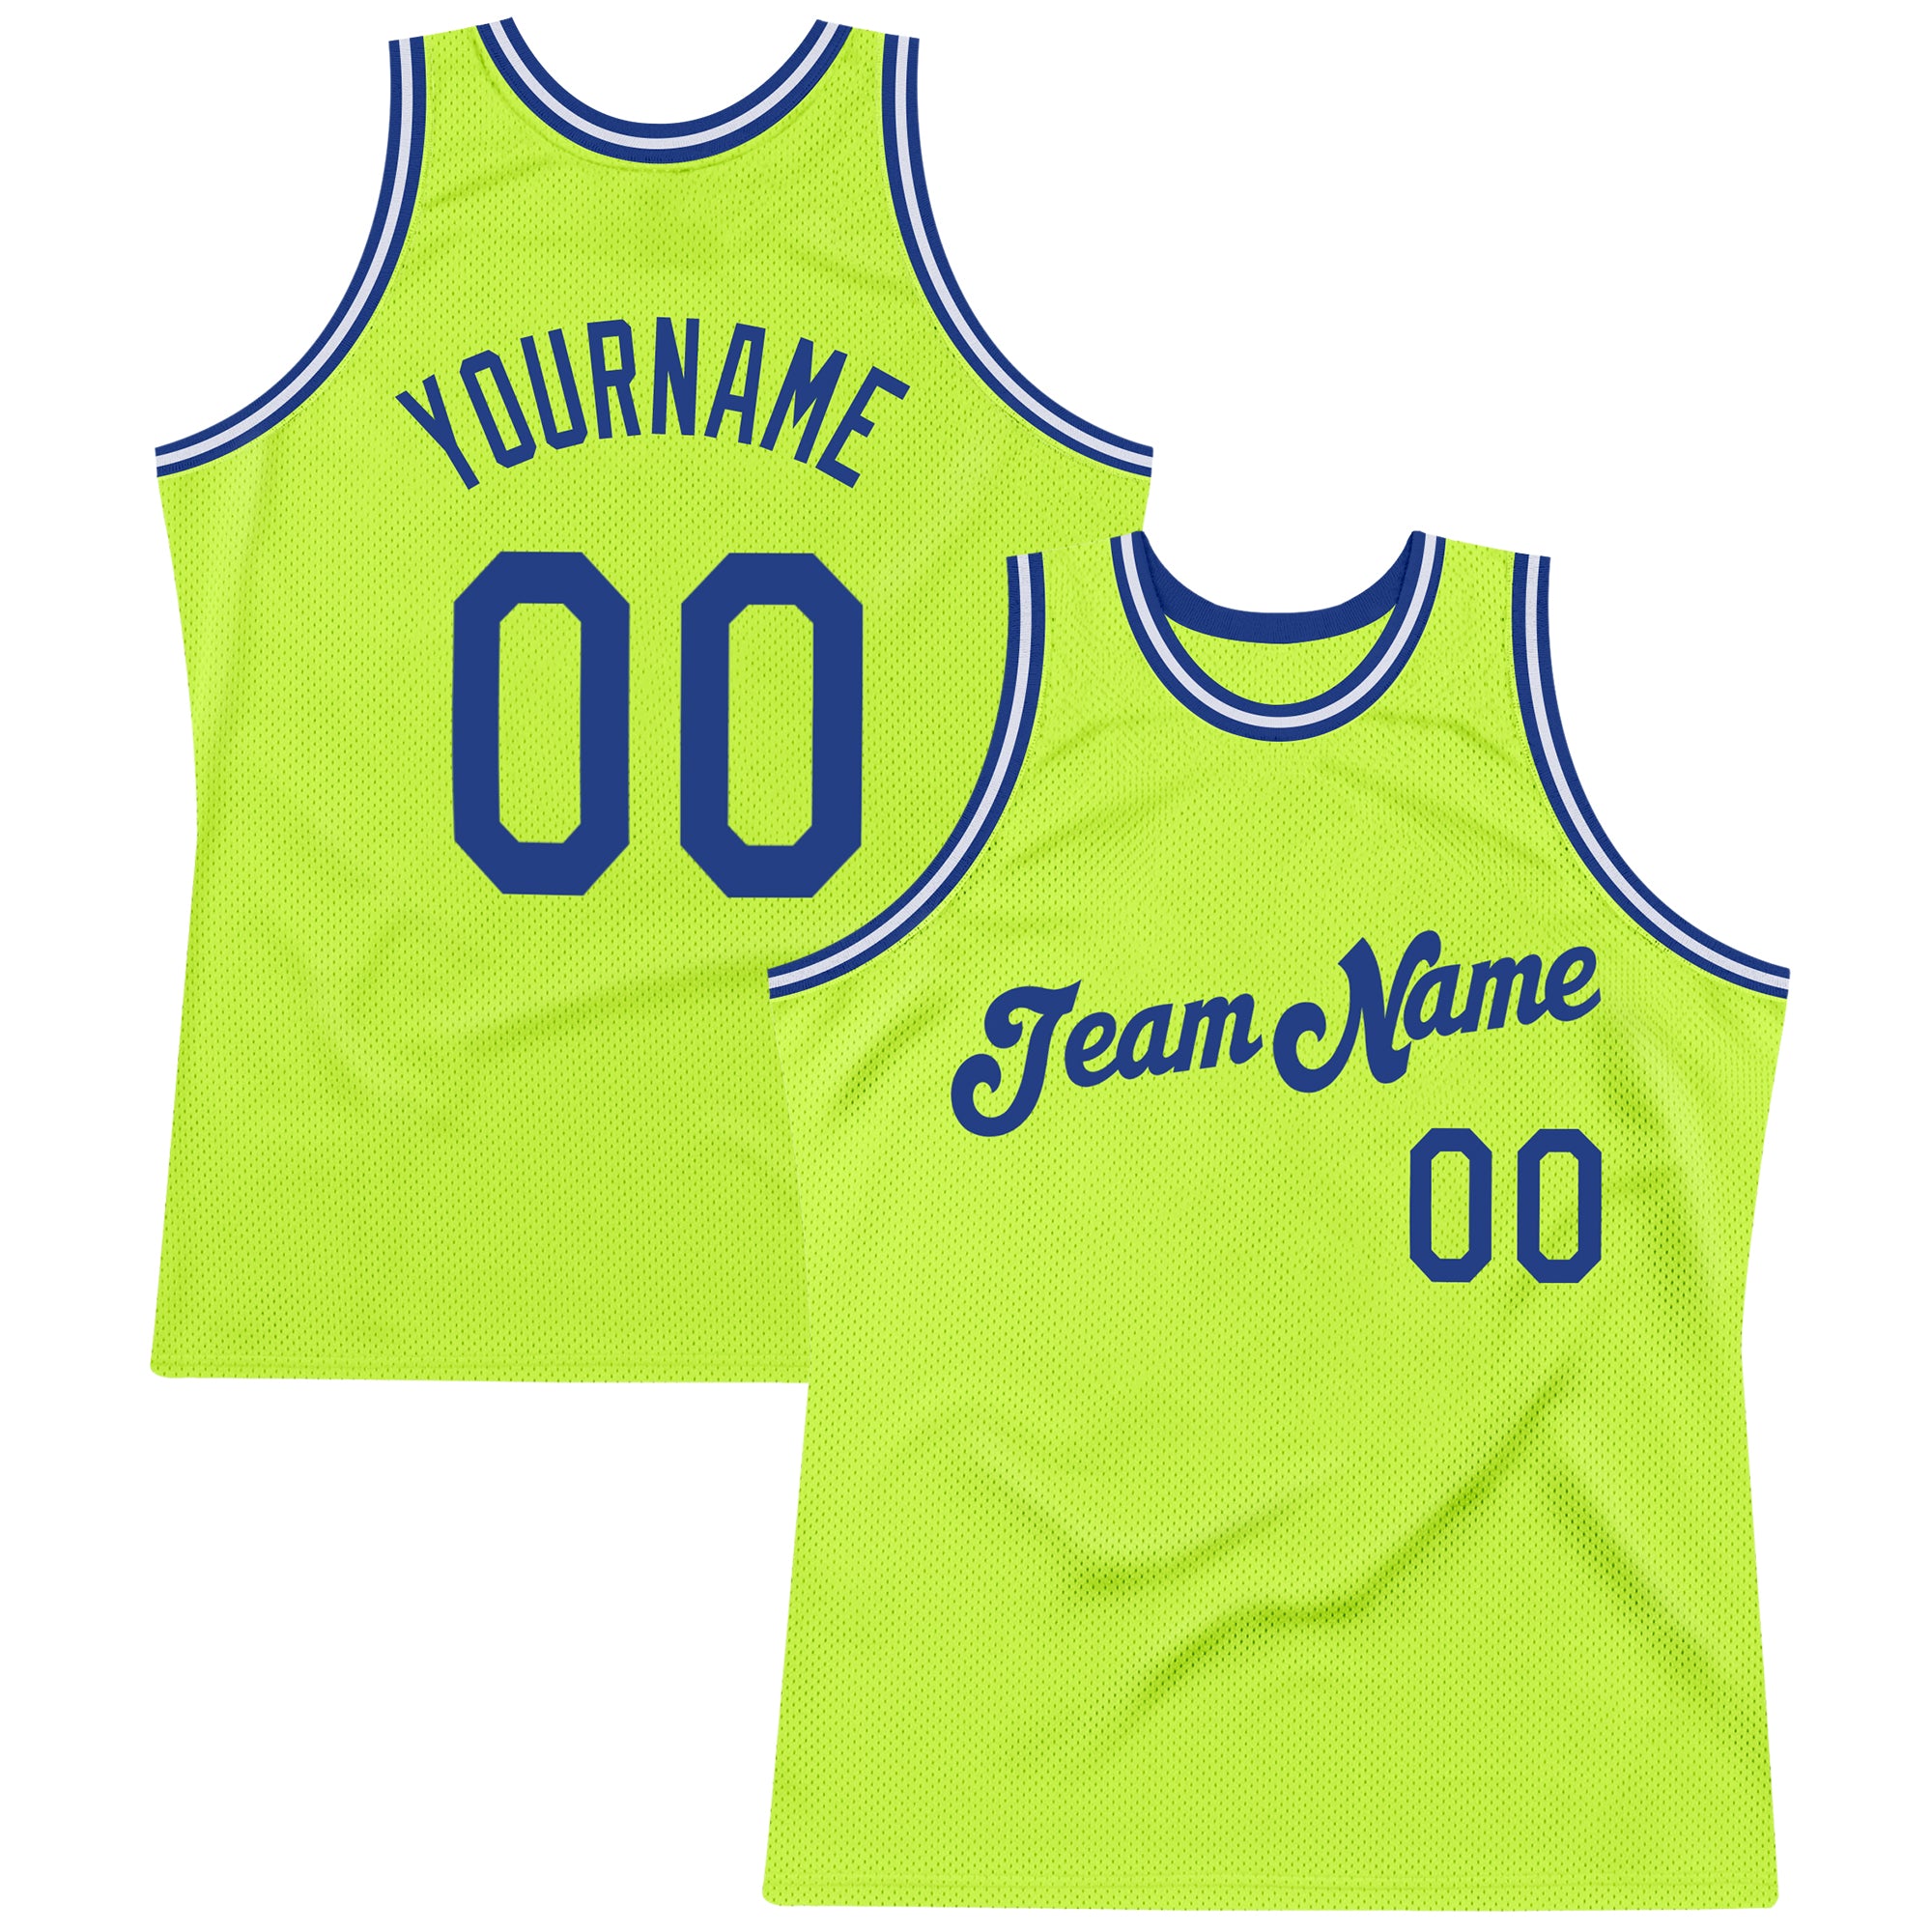 Custom Own Royal White Light Blue Basketball Stitched Jersey Free Shipping  – Fiitg